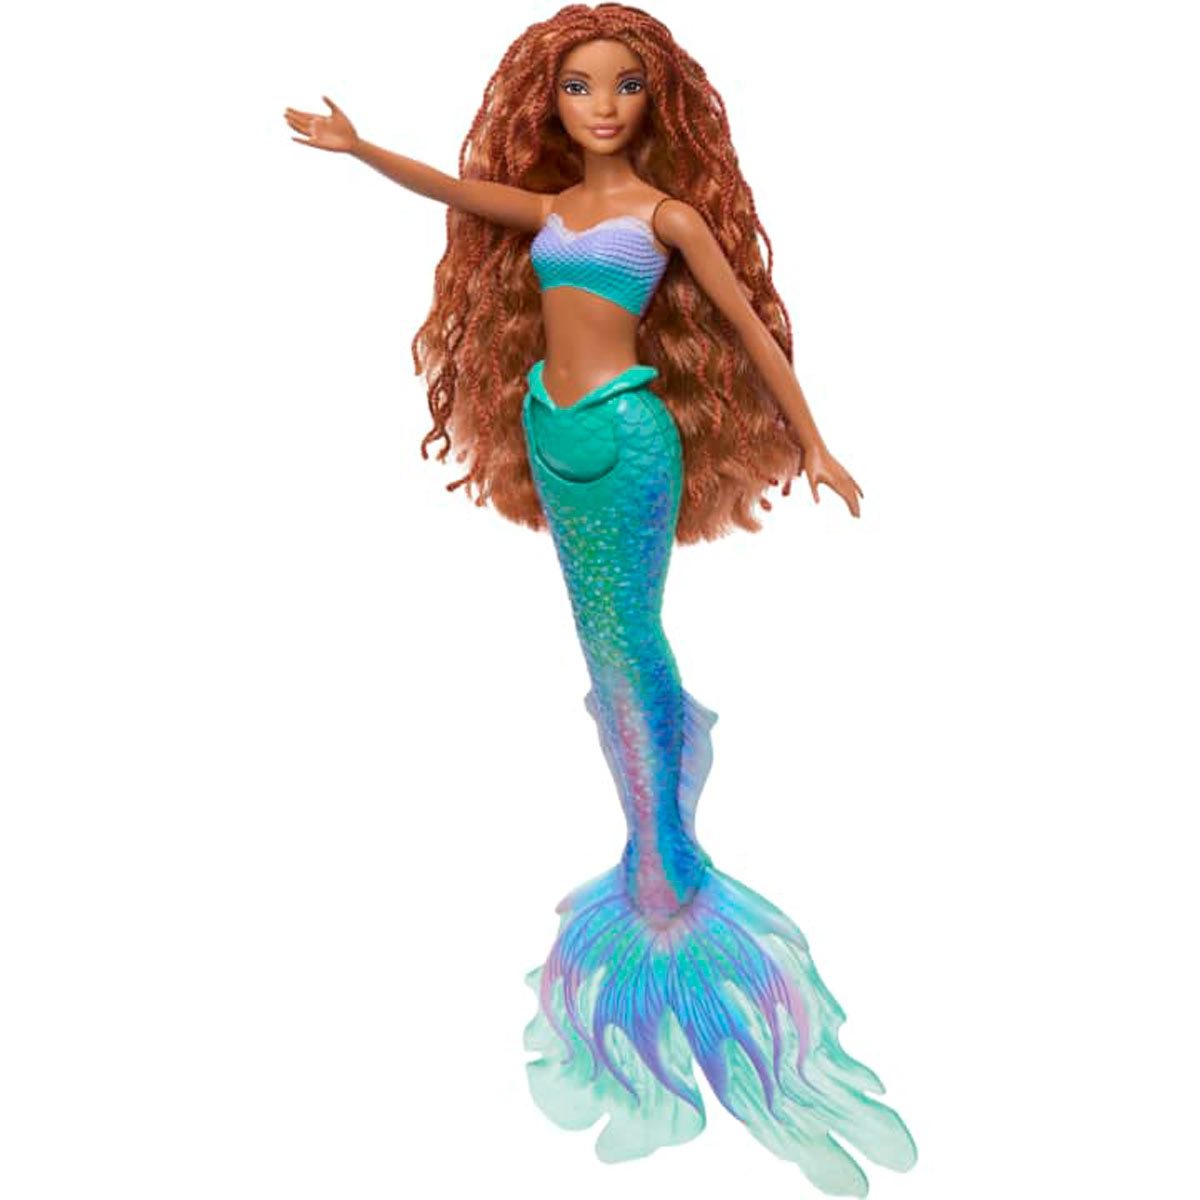 The Little Mermaid Live Action Ariel Doll